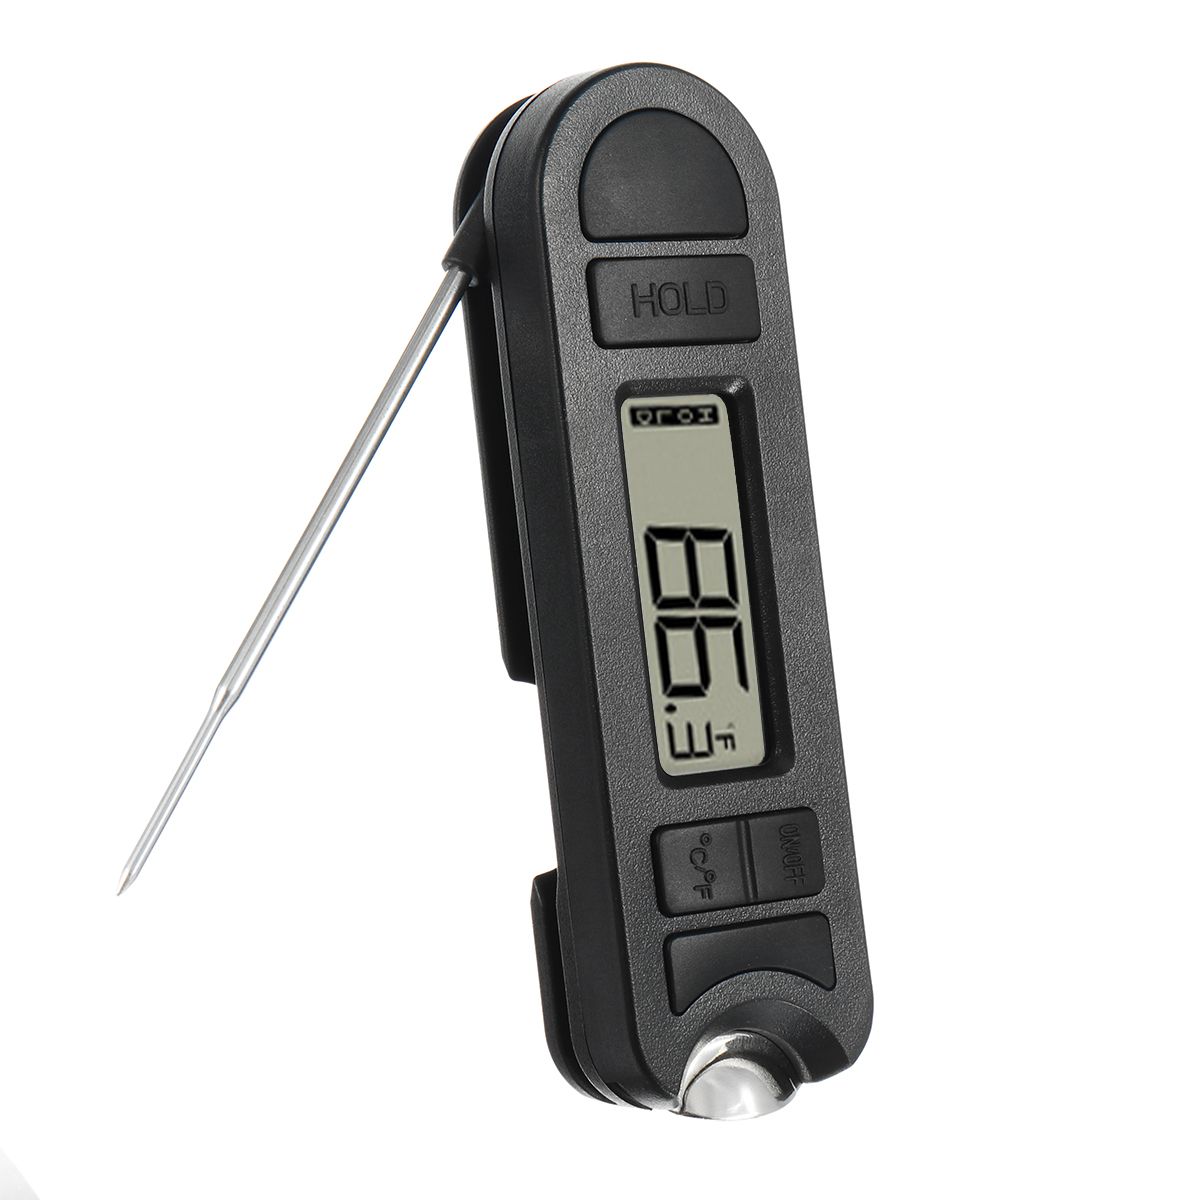 Digital-Fold-BBQ-Thermometer-with-Bottle-Opener-Food-Kitchen-Water-Oil-Temperature-Meter-Tools-1265305